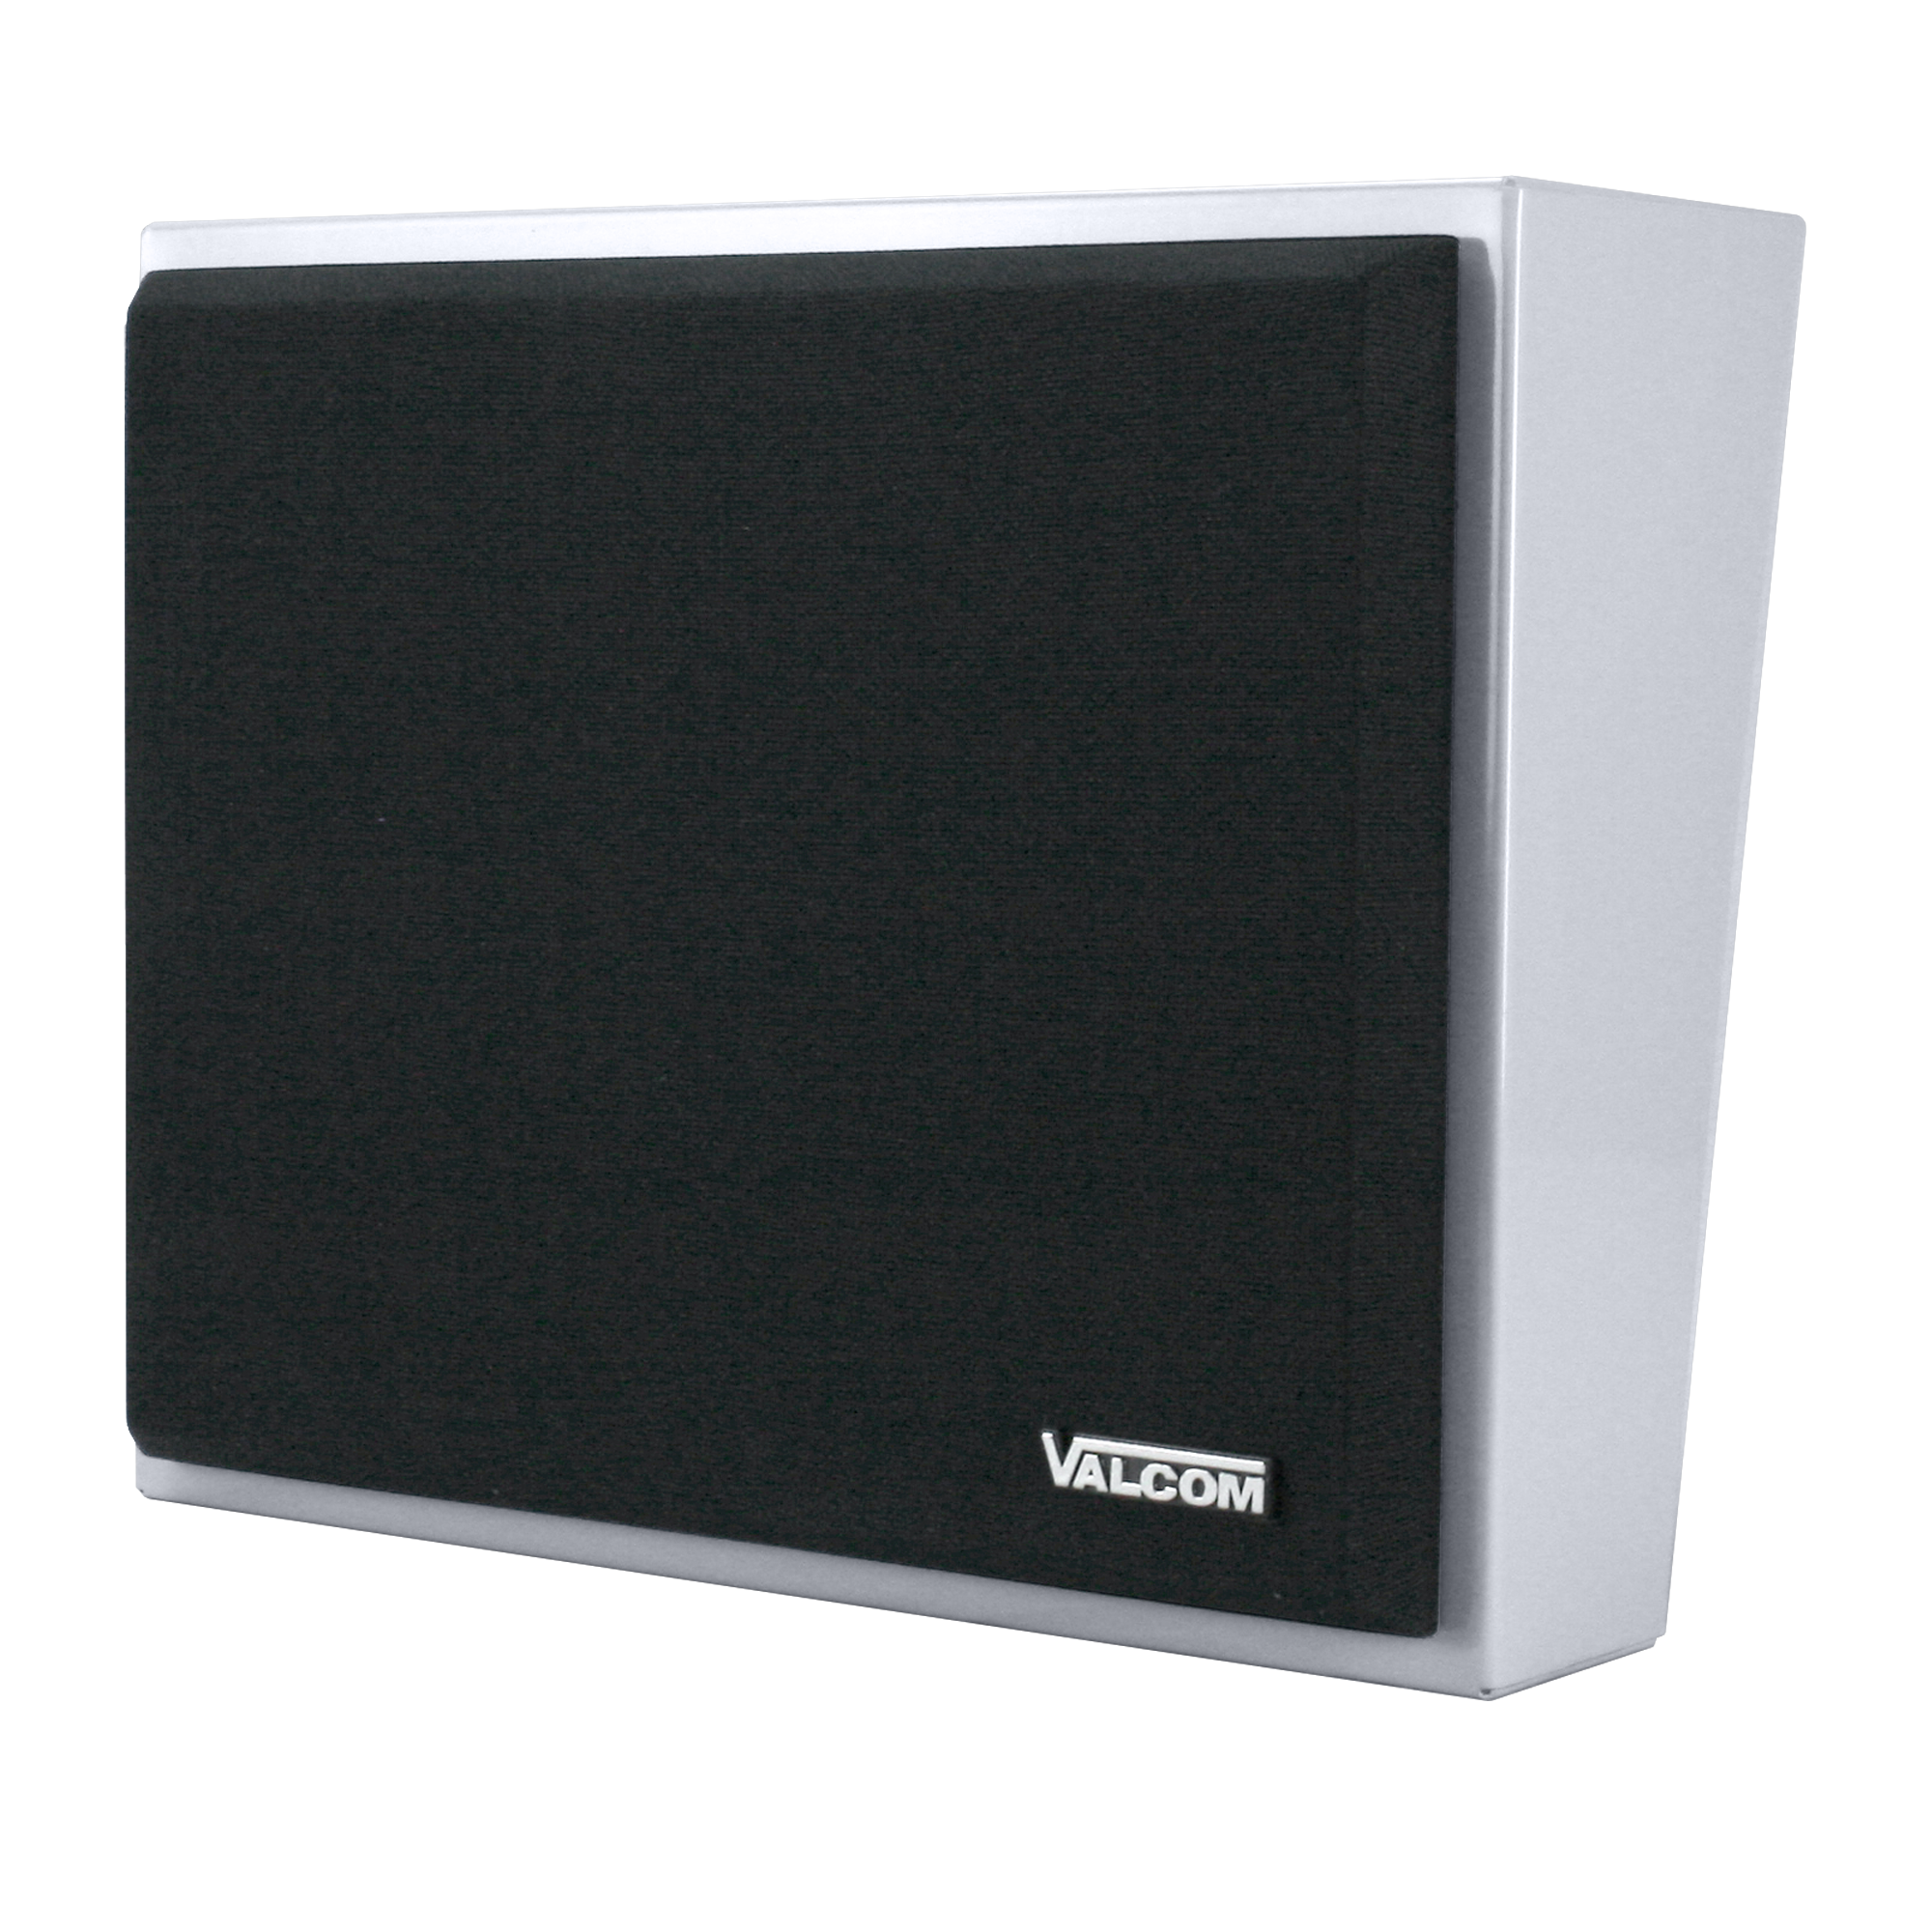 V-1052C Metal Wall Speaker, One-Way, Gray with Black Grille